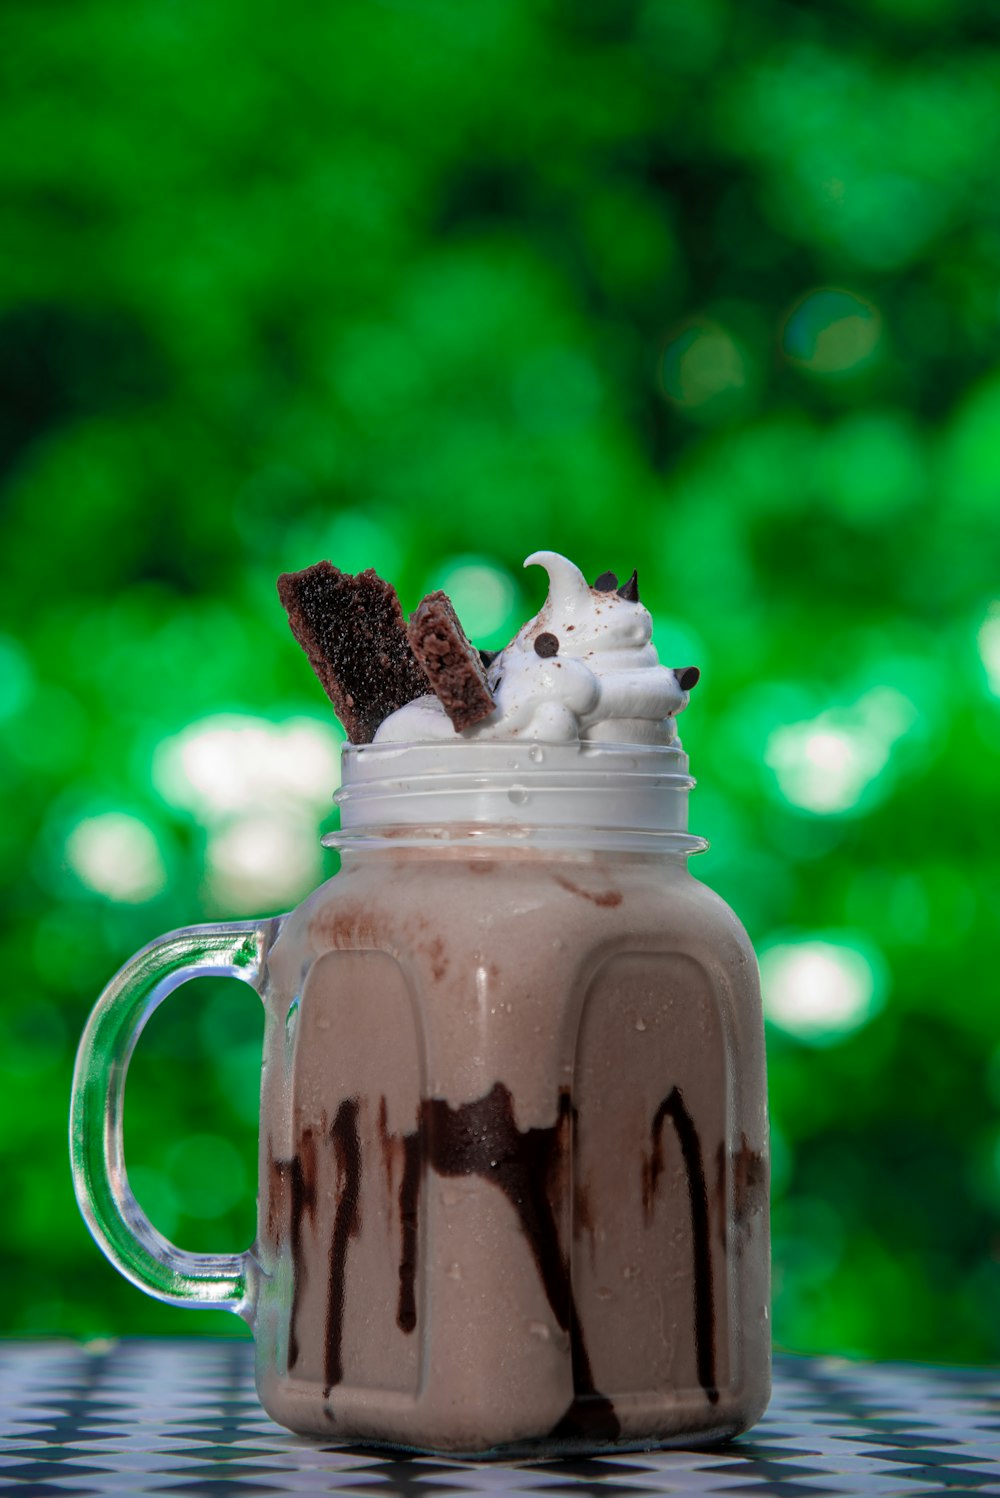 a cup of chocolate milkshake with whipped cream and chocolate on top